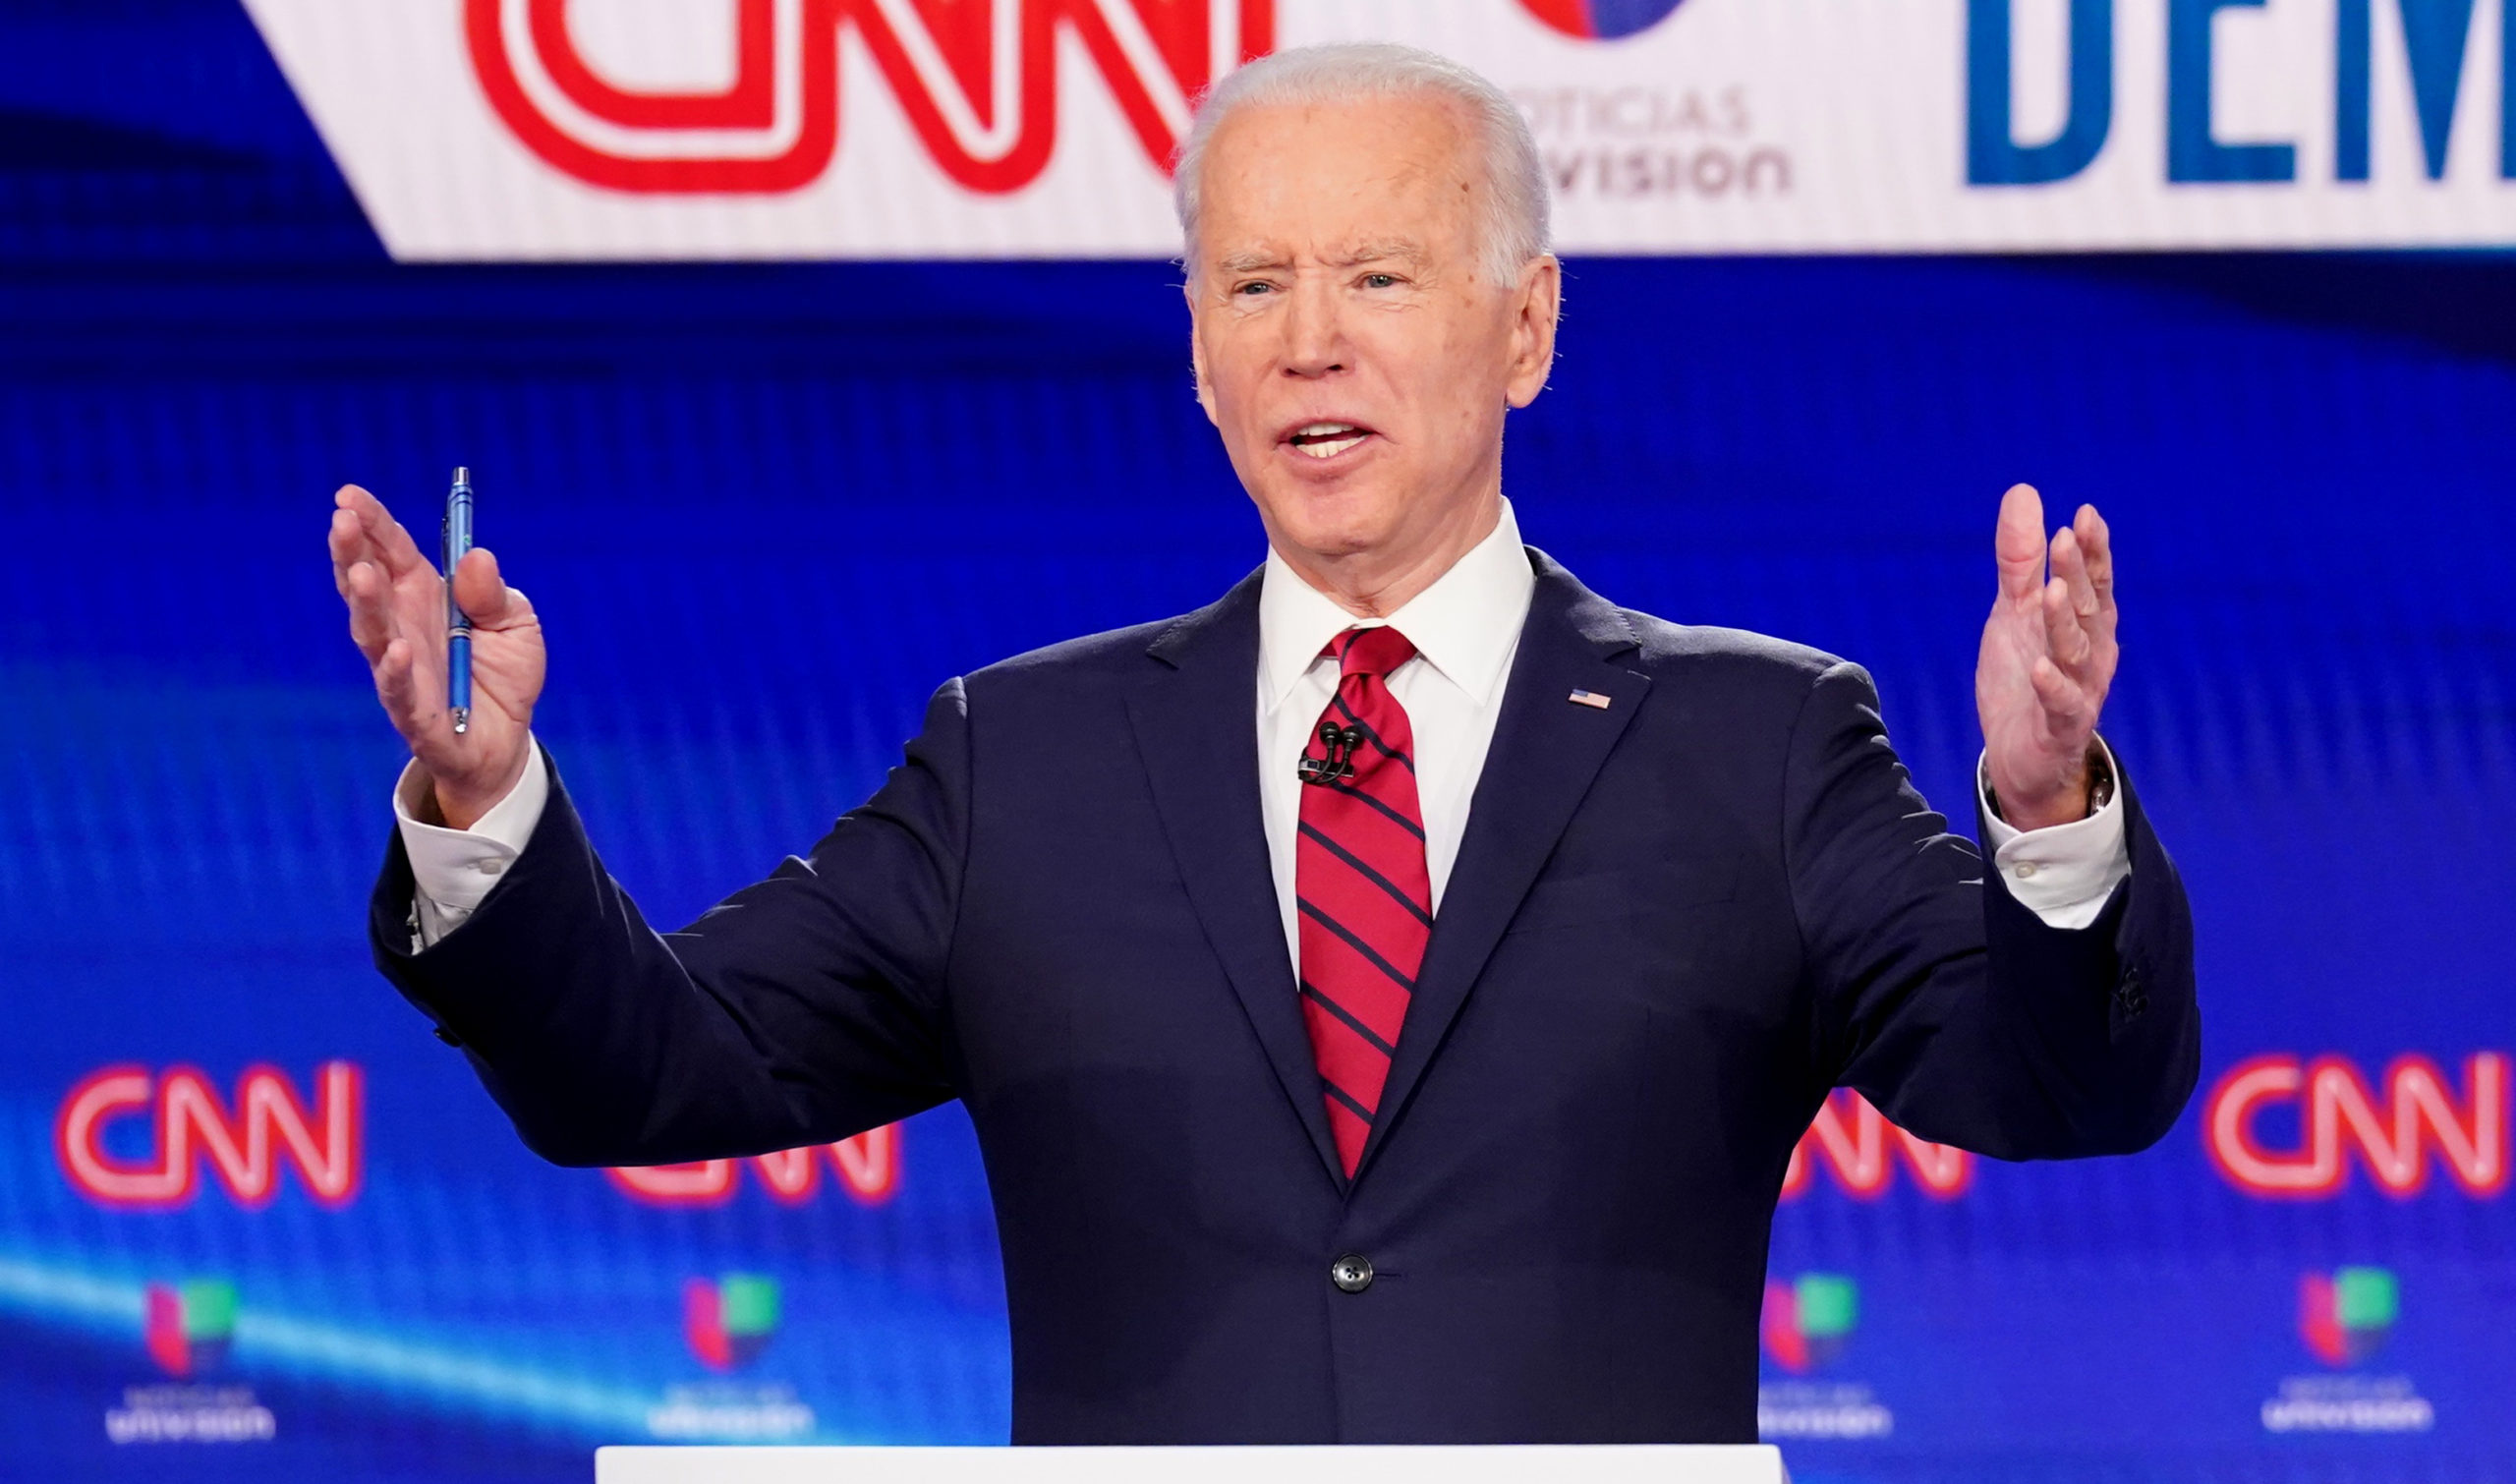 Trump Team Calls Biden A 'Very Good Debater' As They Desperately Try To Lower Own Expectations